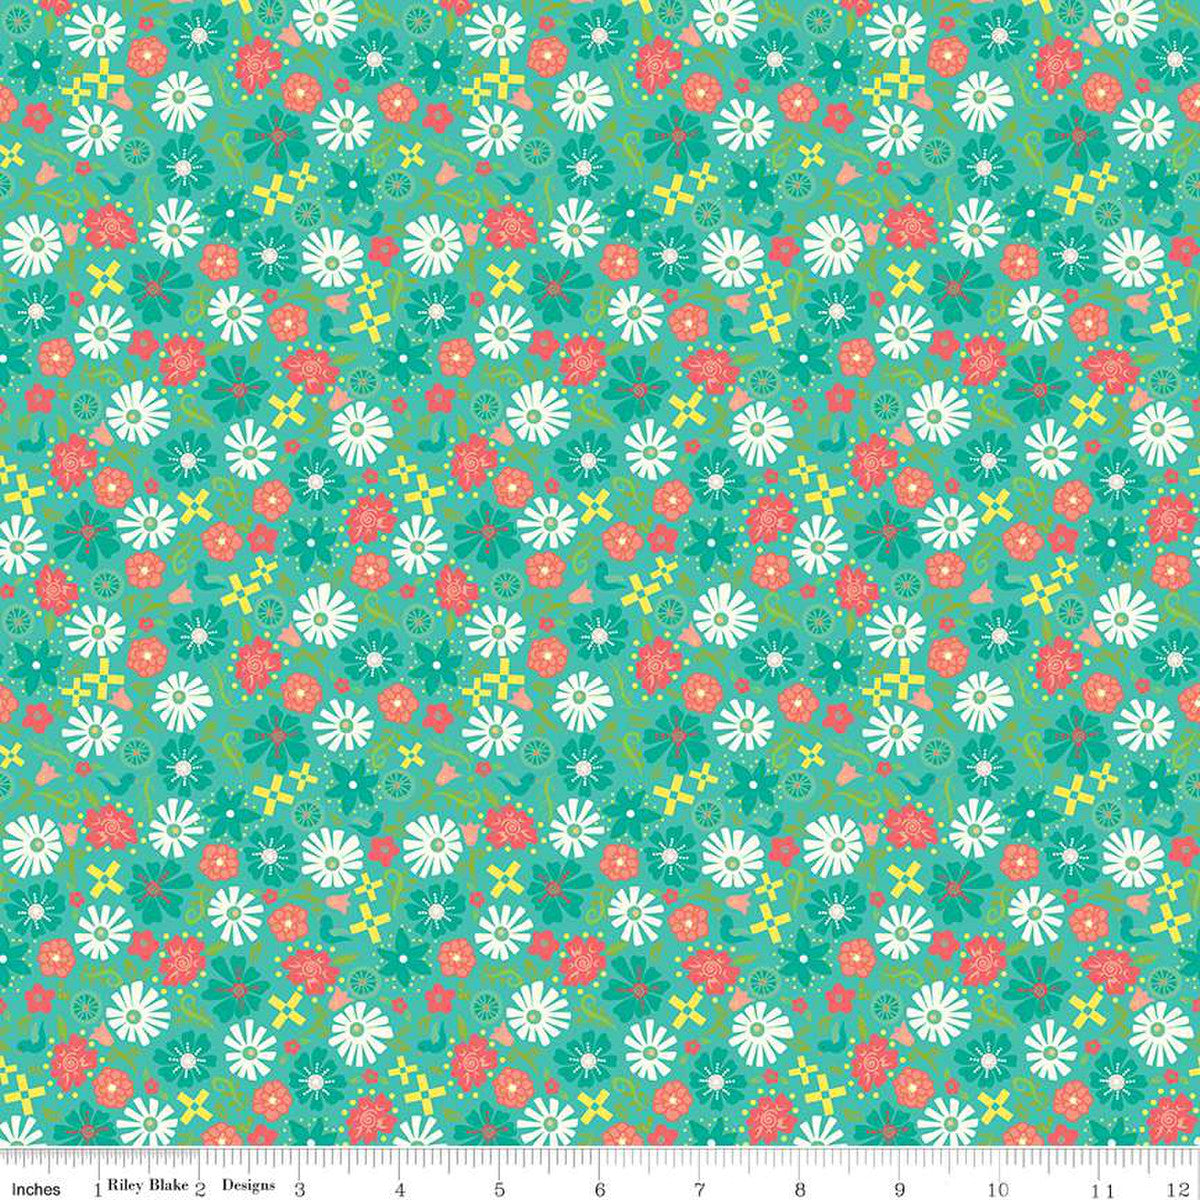 Gingham Cottage Flowers Seaglass Cotton Fabric